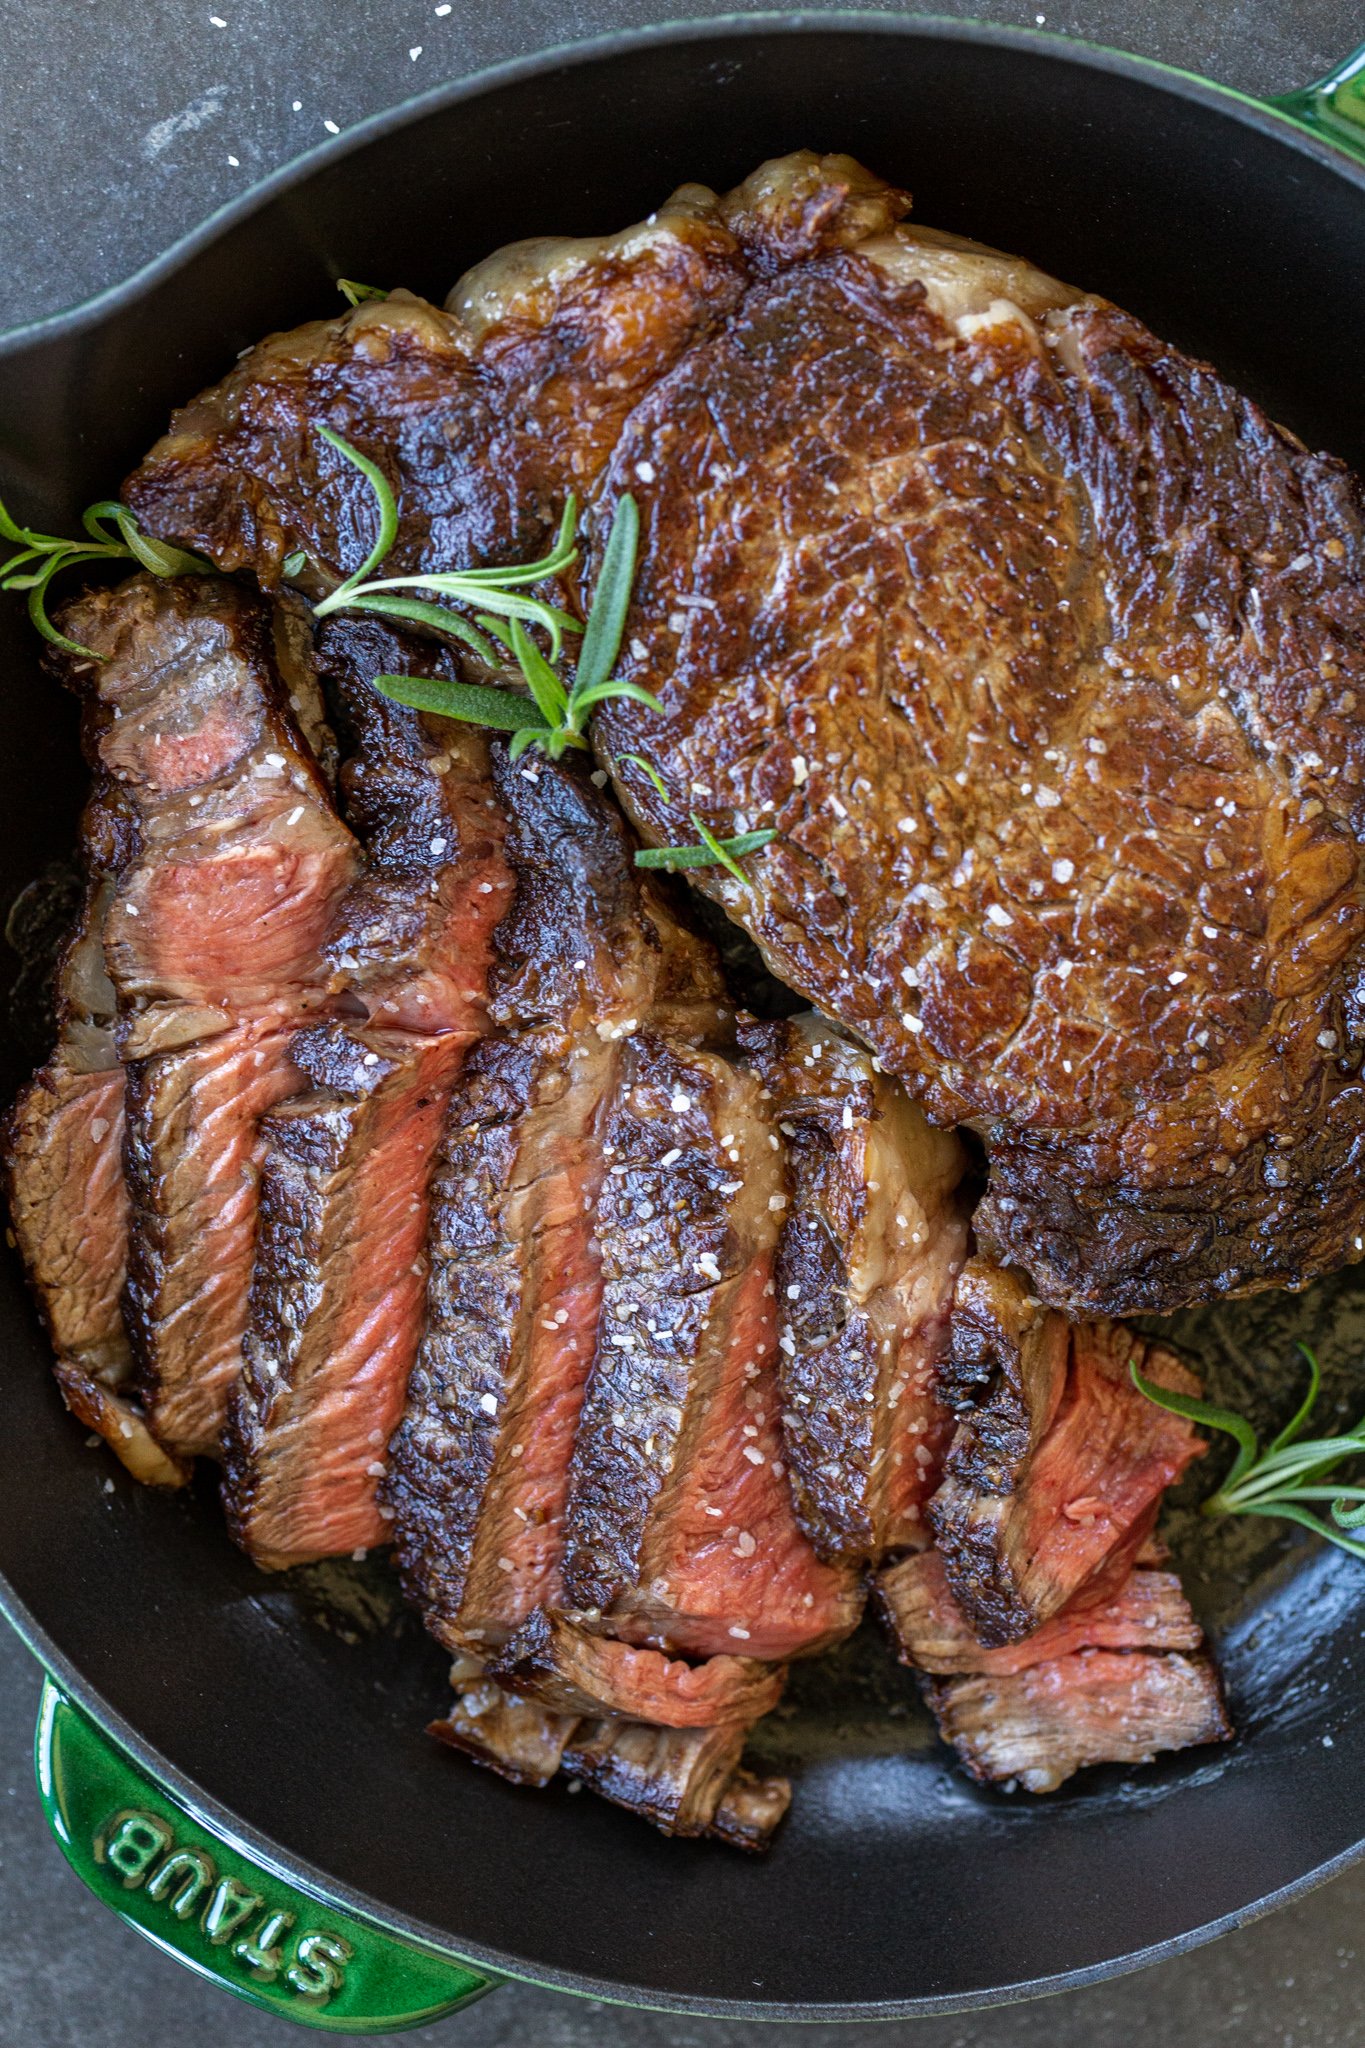 Easy Oven Grilled Steak Recipe  Make Perfect Steak in the Oven